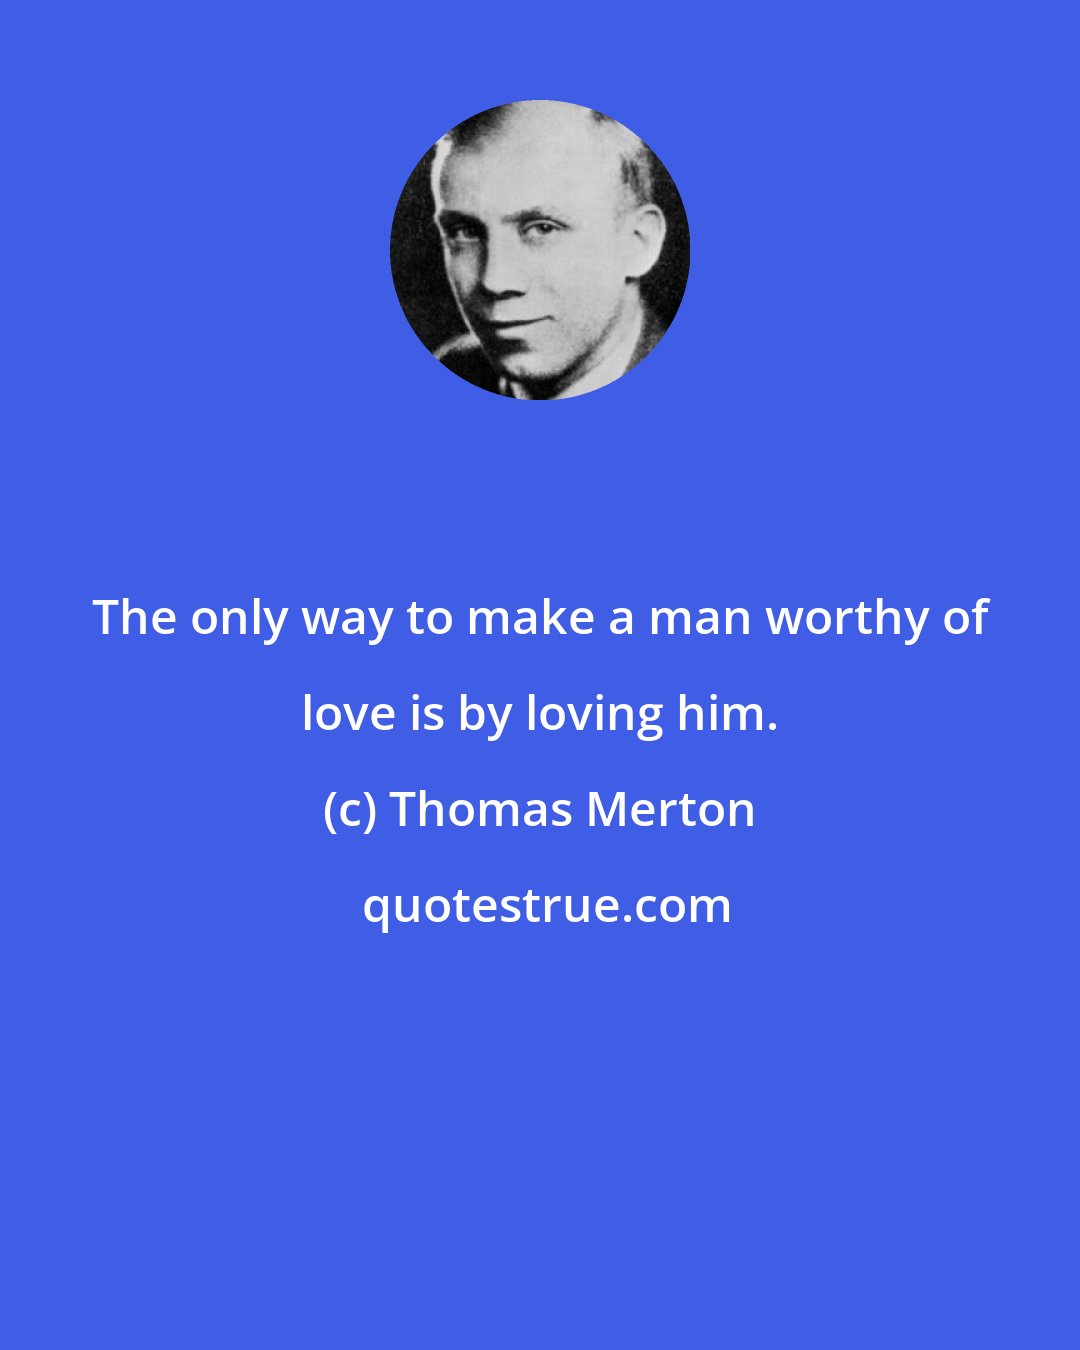 Thomas Merton: The only way to make a man worthy of love is by loving him.